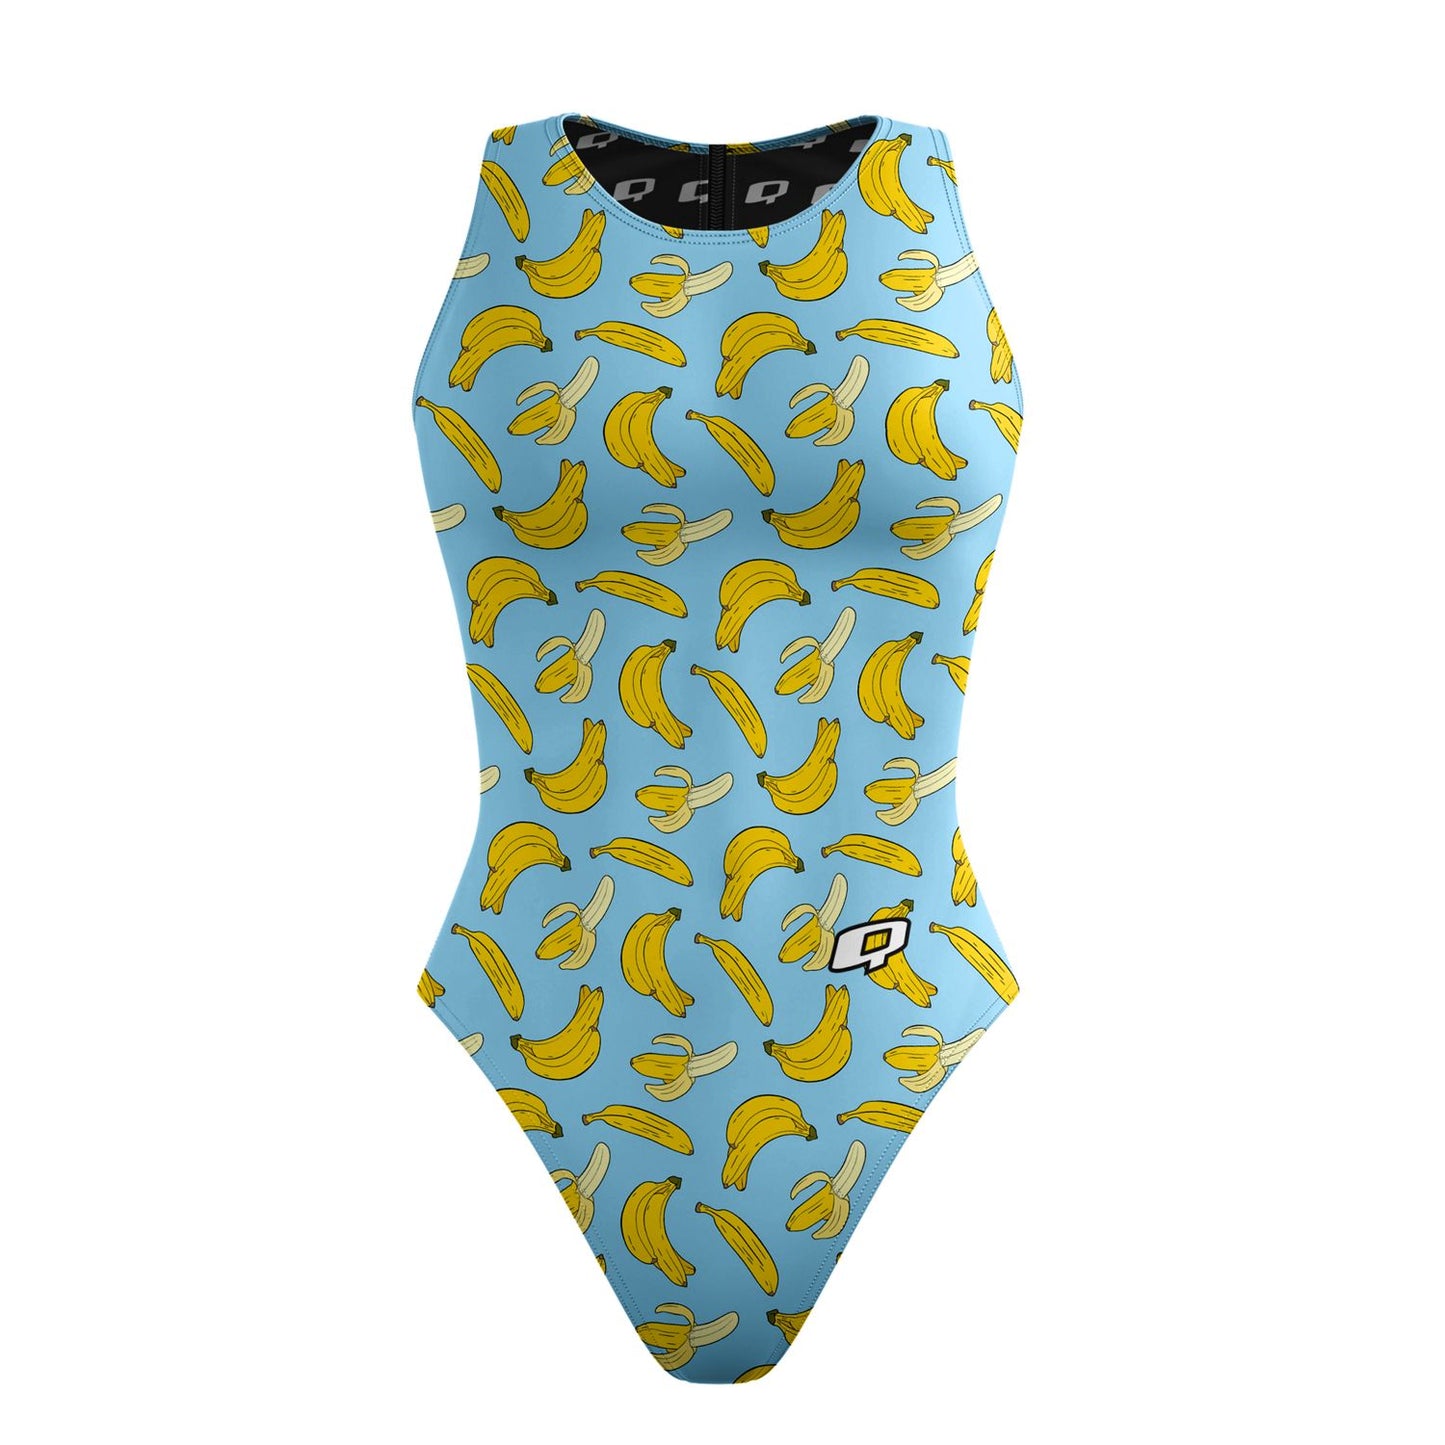 This Suit is Bananas - Women Waterpolo Swimsuit Classic Cut